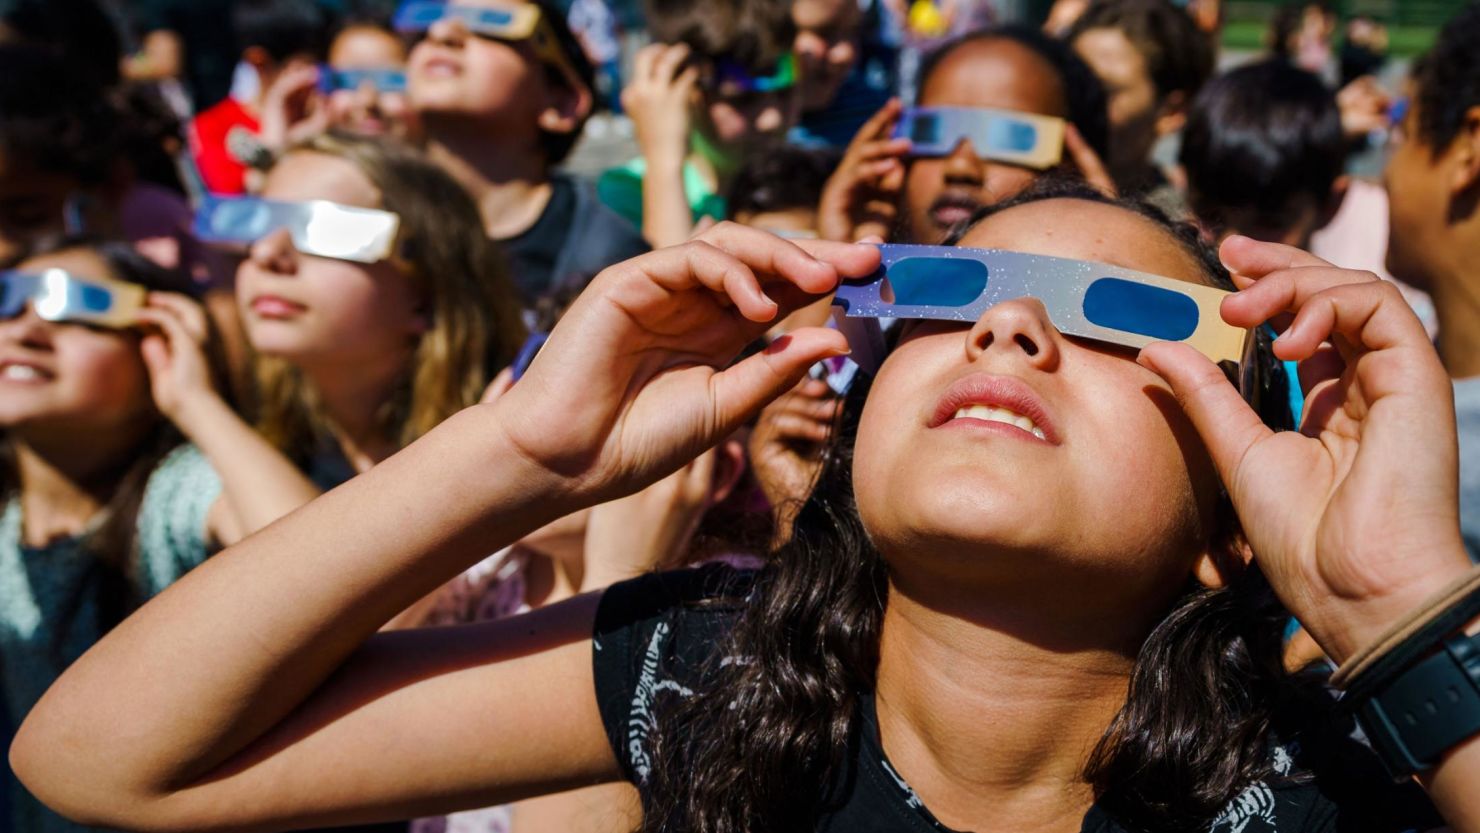 TOPSHOT - Pupils, wearing protective glasses, look at the partial solar eclipse in Schiedam on June 10, 2021. - A solar eclipse will be visible over the Earth's northern hemisphere on June 10, 2021 with parts of Canada and Siberia privy to the best view of the celestial event.The eclipse will be partial, which means the people in its shadow won't be plunged into daytime darkness.
 - Netherlands OUT (Photo by Marco de Swart / ANP / AFP) / Netherlands OUT (Photo by MARCO DE SWART/ANP/AFP via Getty Images)